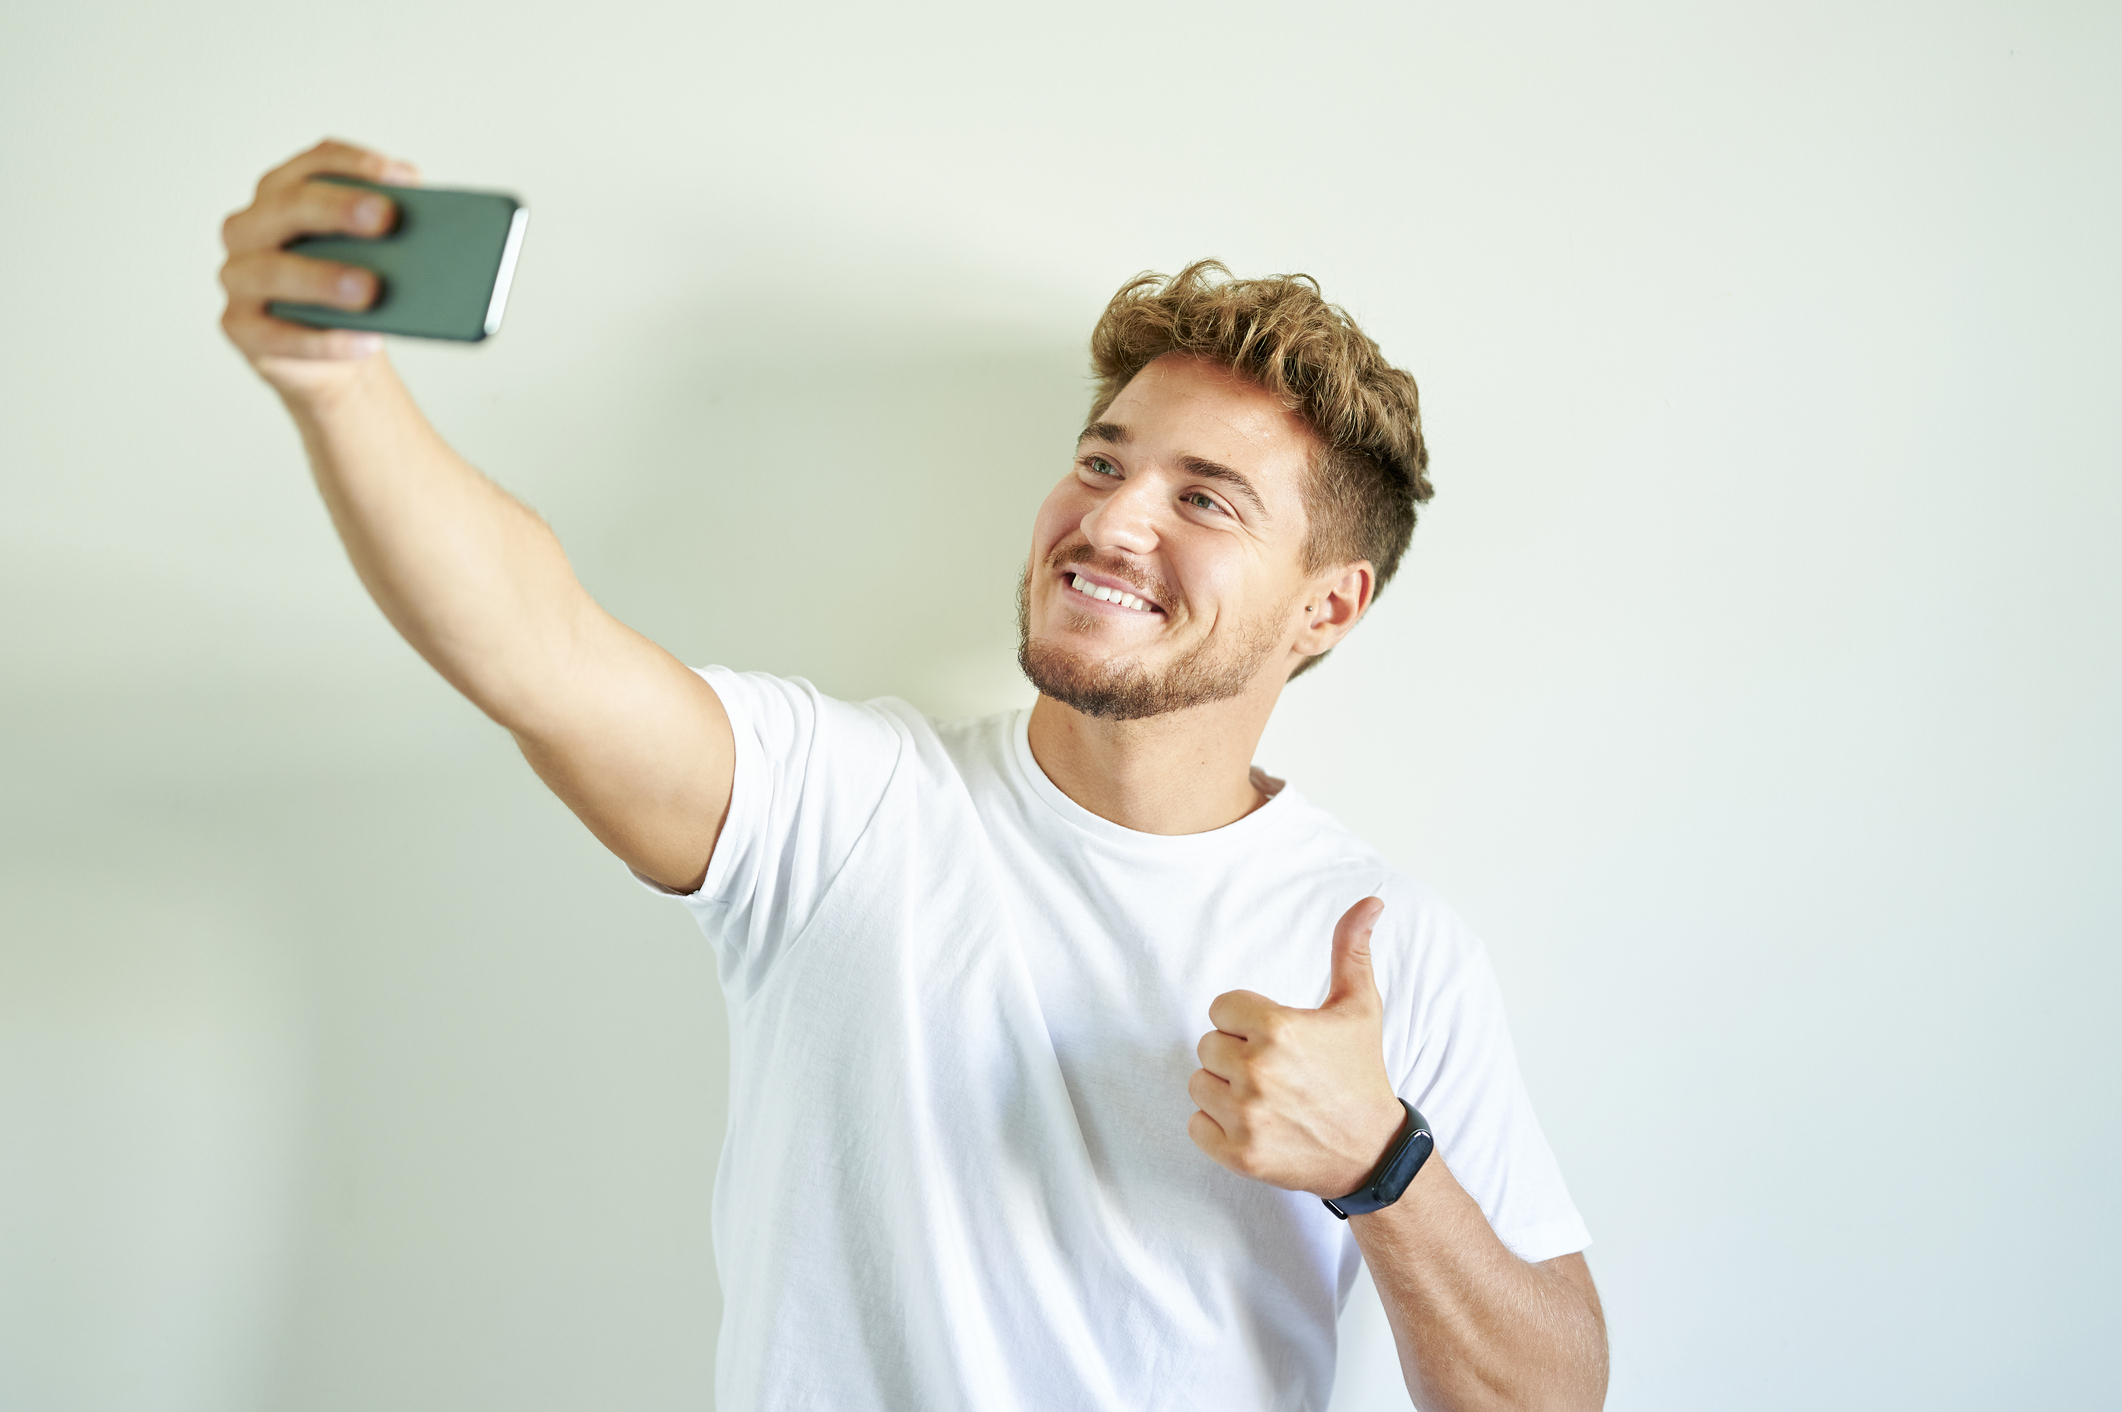 A man taking a selfie with his thumb up